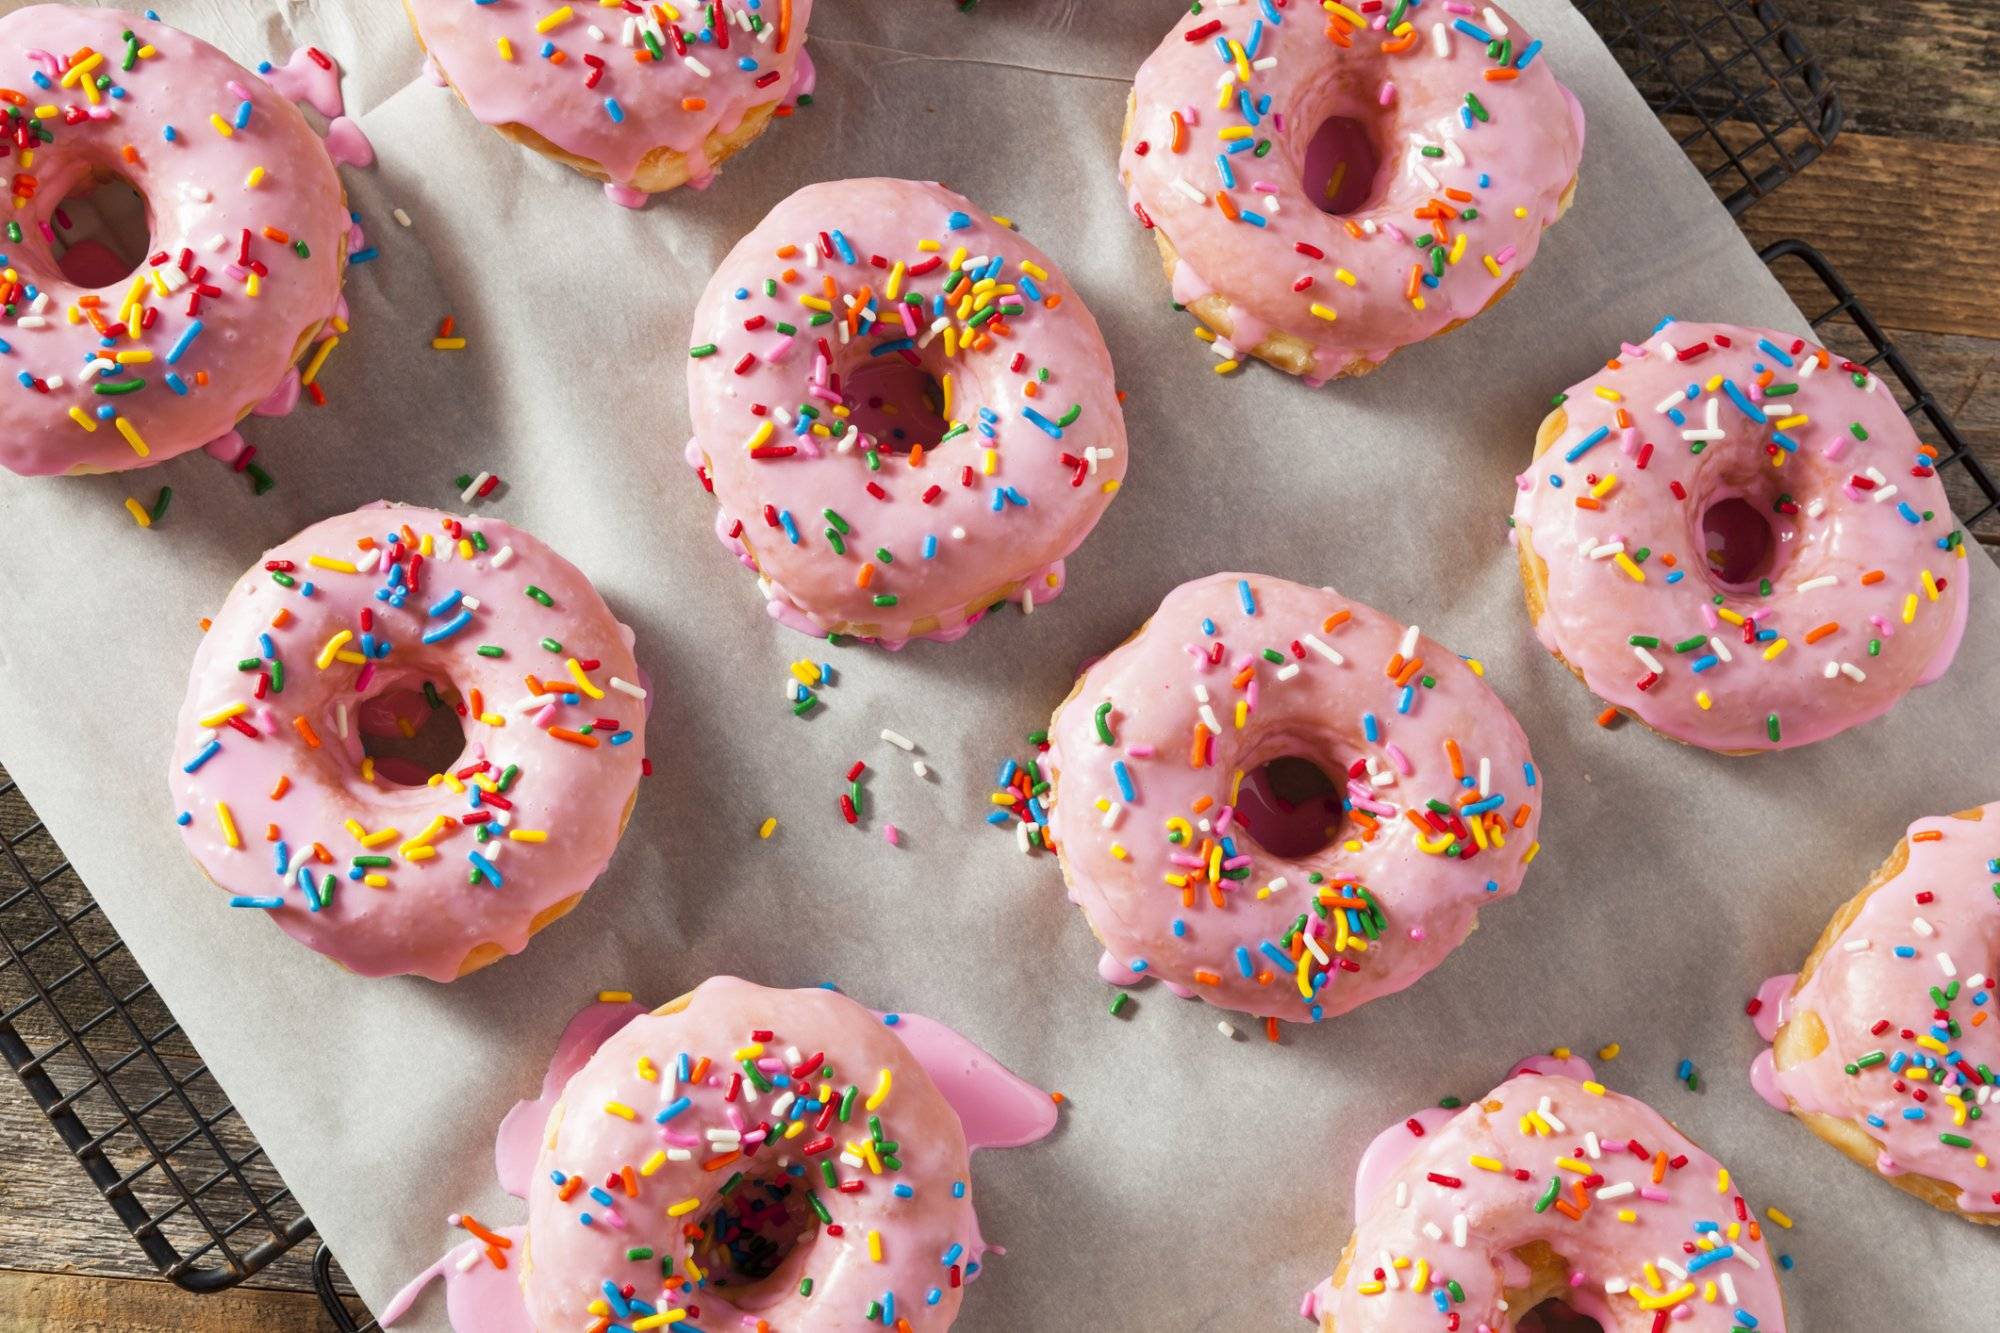 Spoil Yourself to Sweet Indulgences at the Popular Duncanville Donut Shop